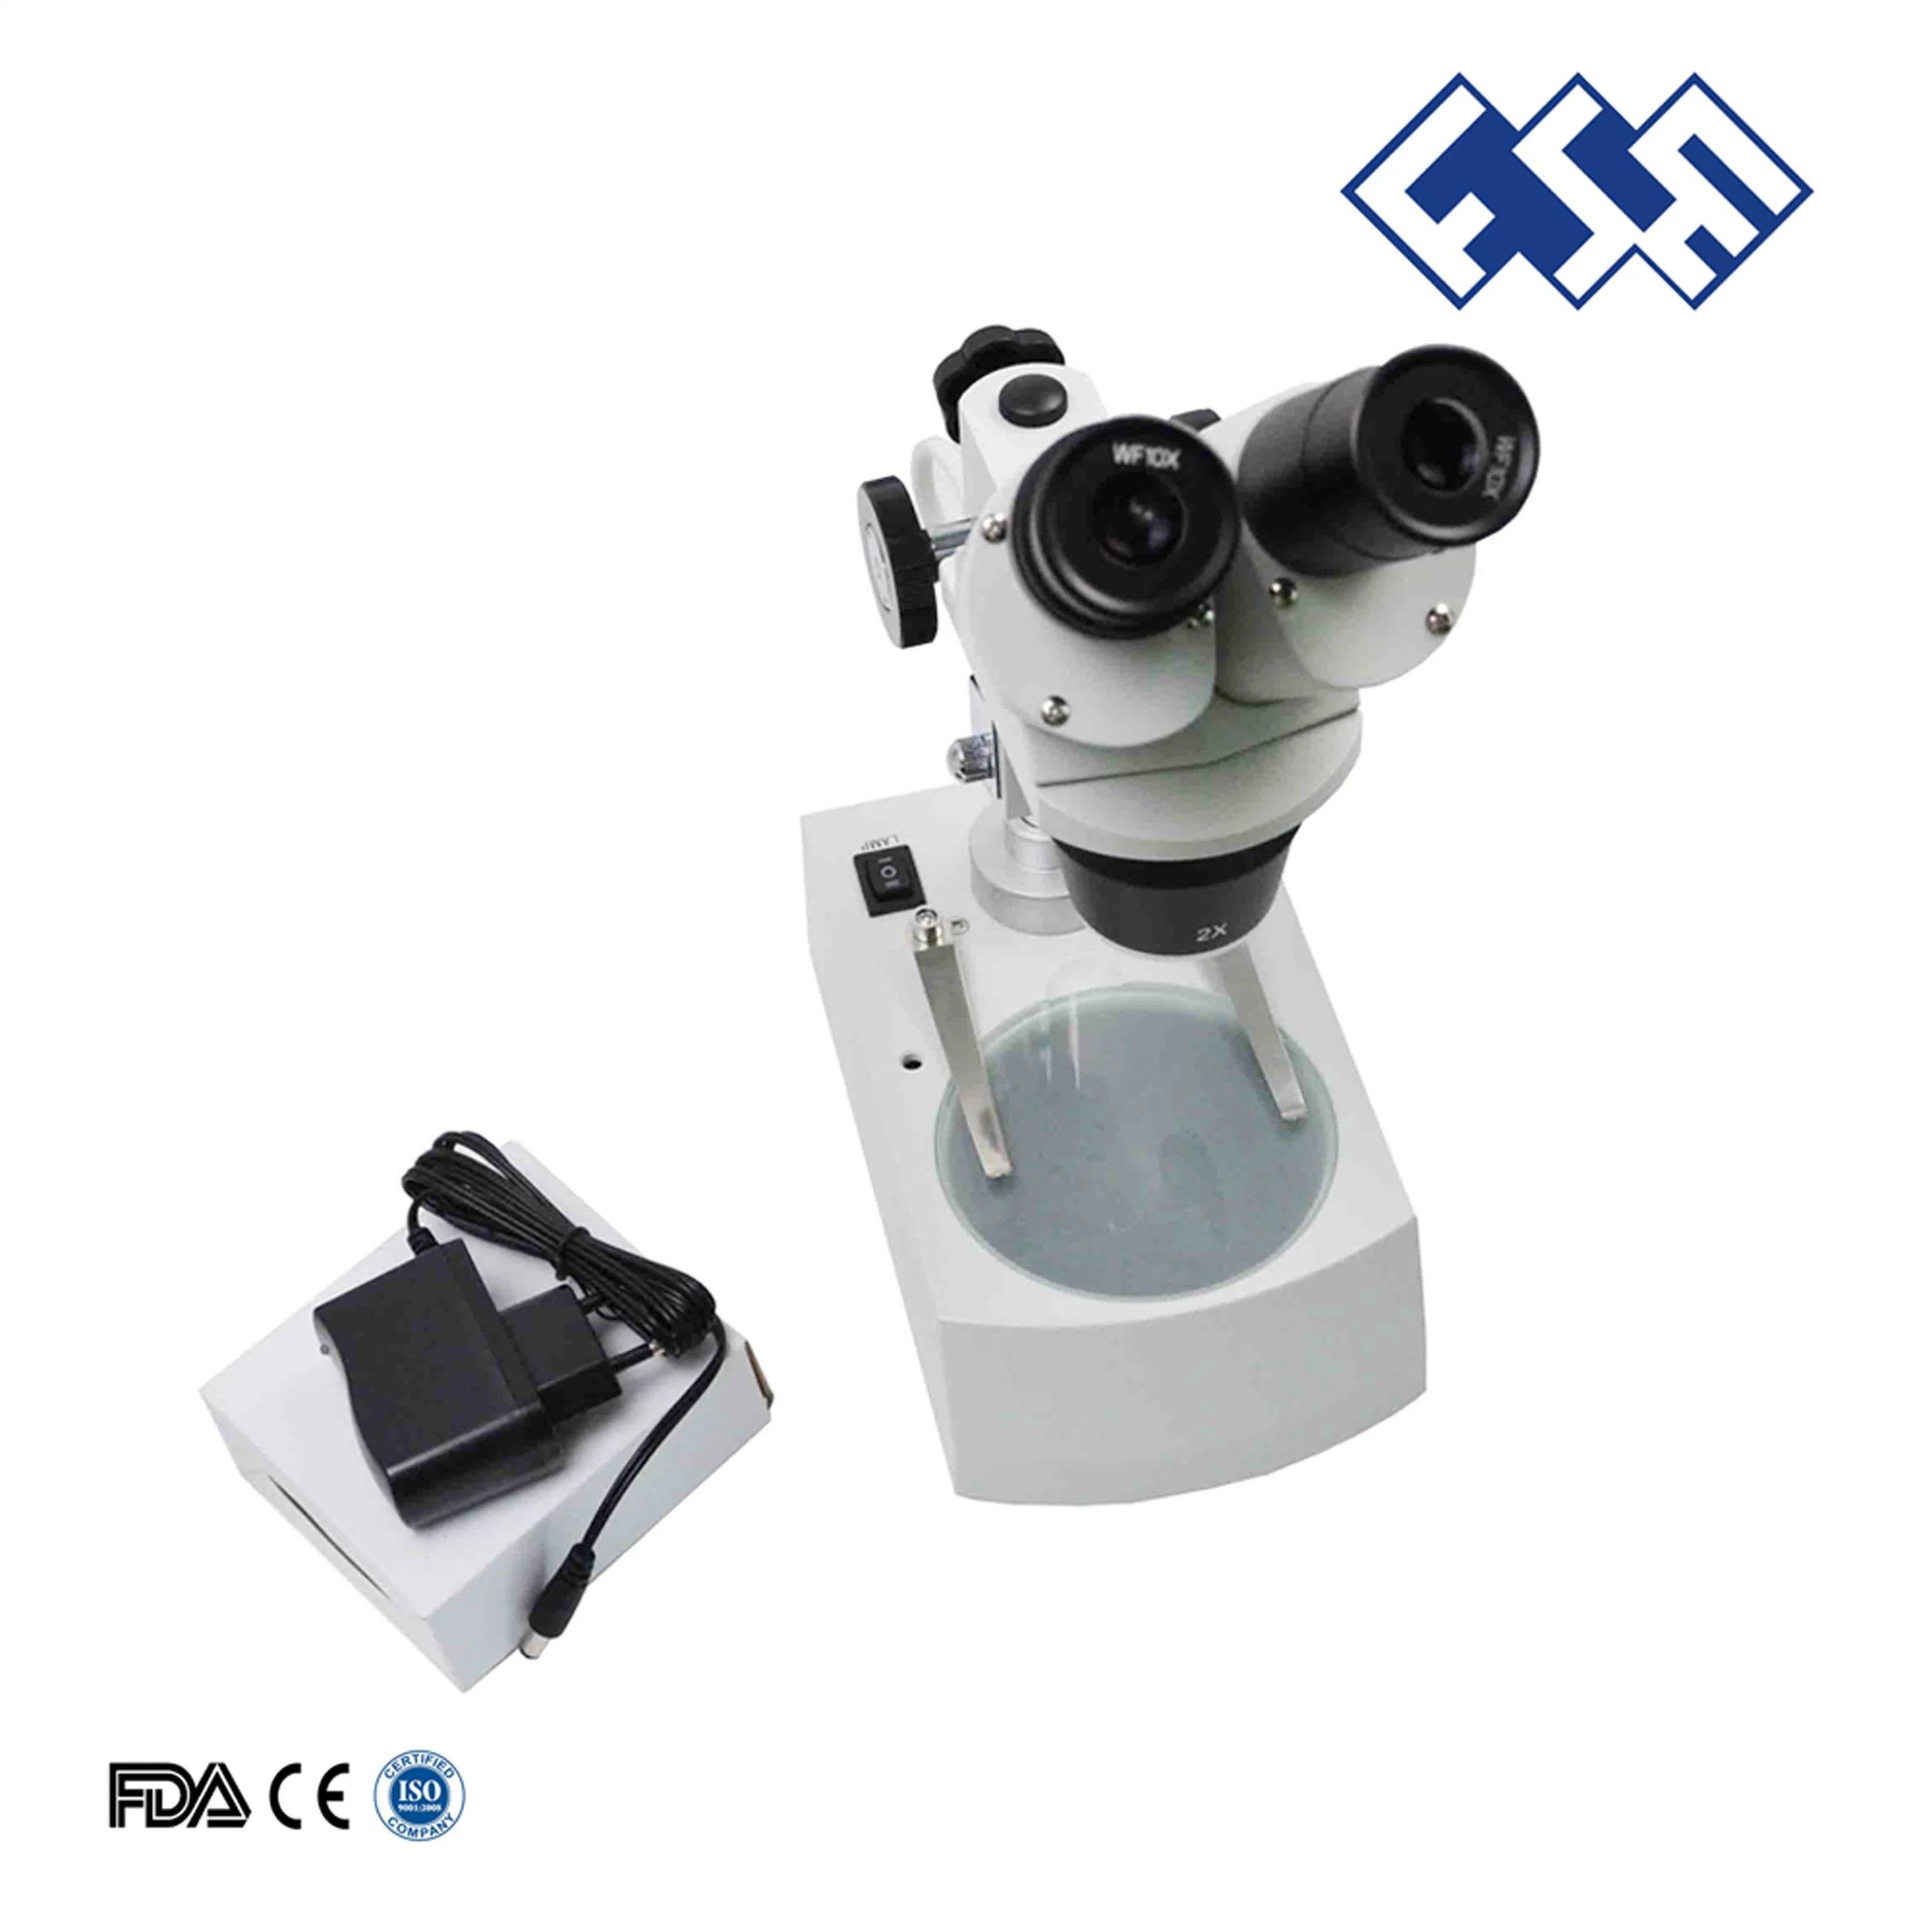 FM-3024r2l Zoom Stereo Microscope with Standard Magnification 10X-20X